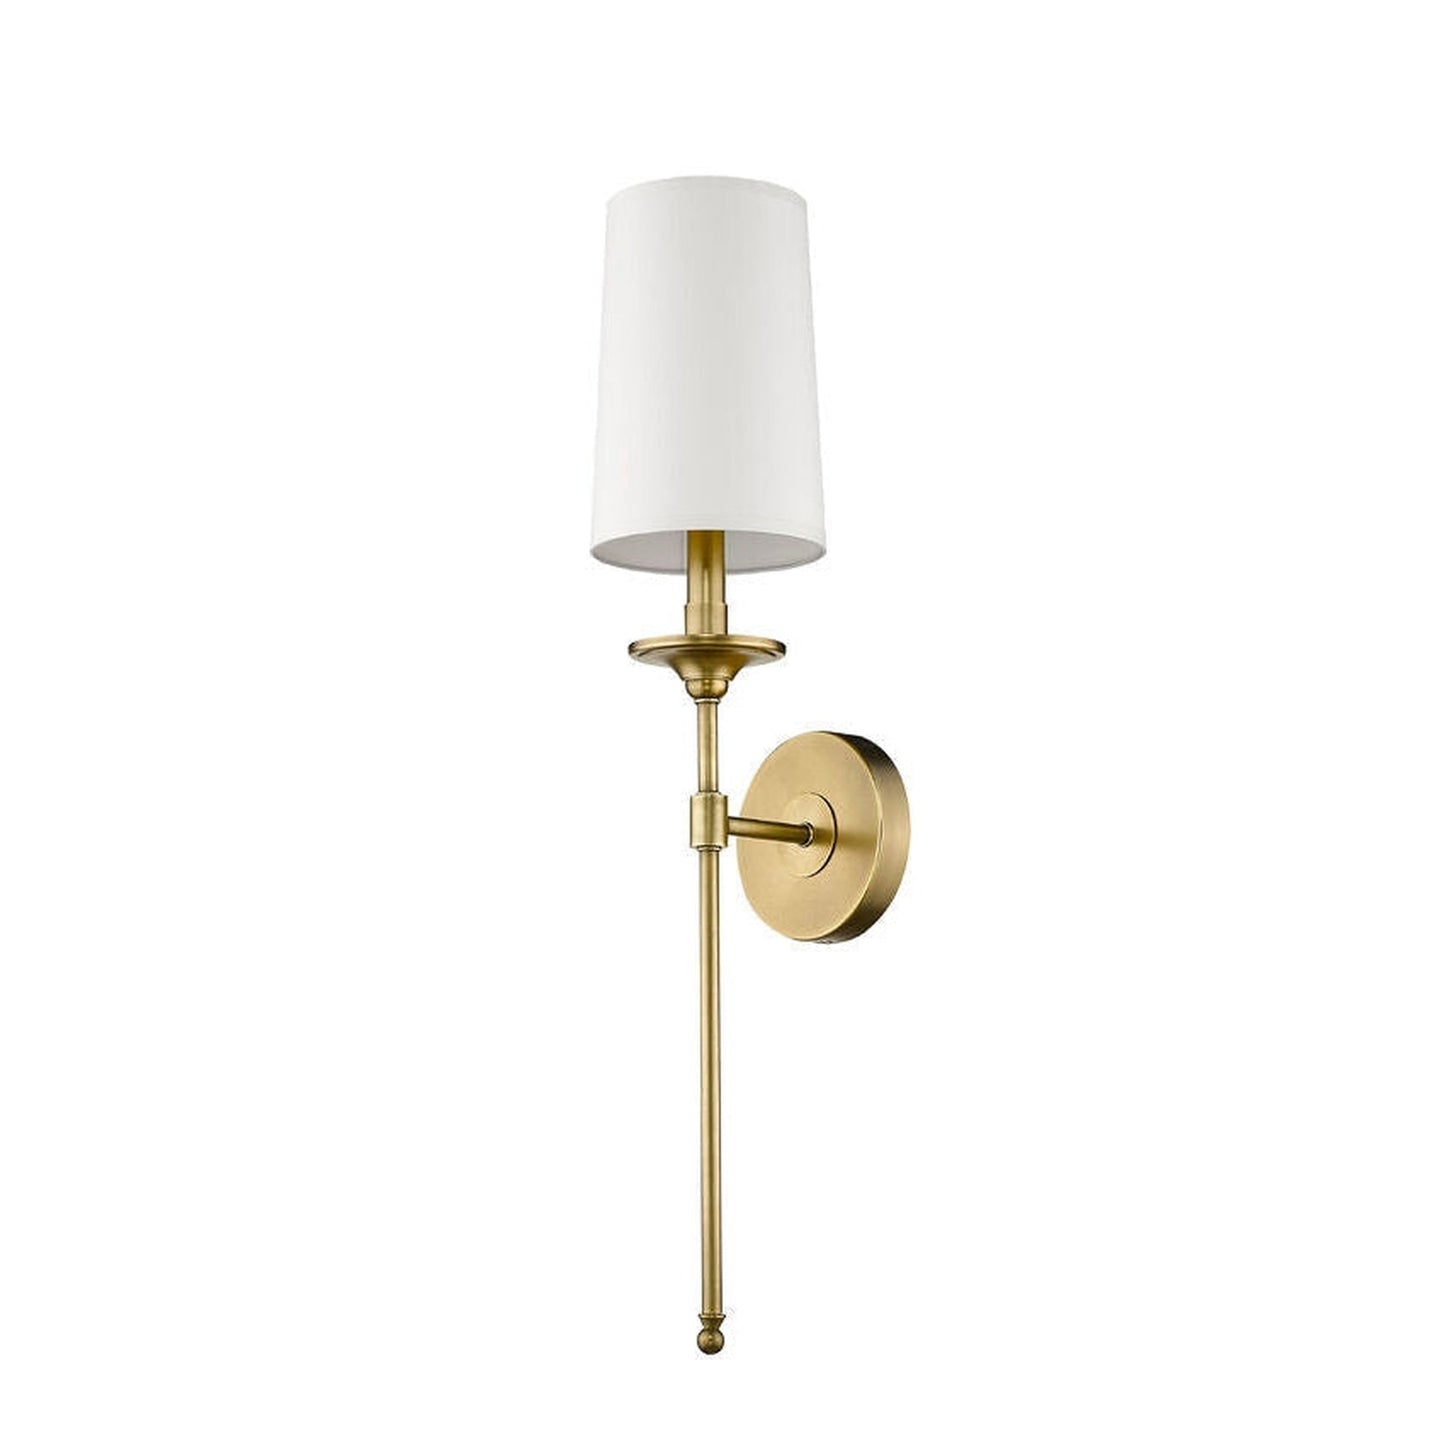 Z-Lite Emily 6" 1-Light Rubbed Brass Wall Sconce With Beige Parchment Paper Shade